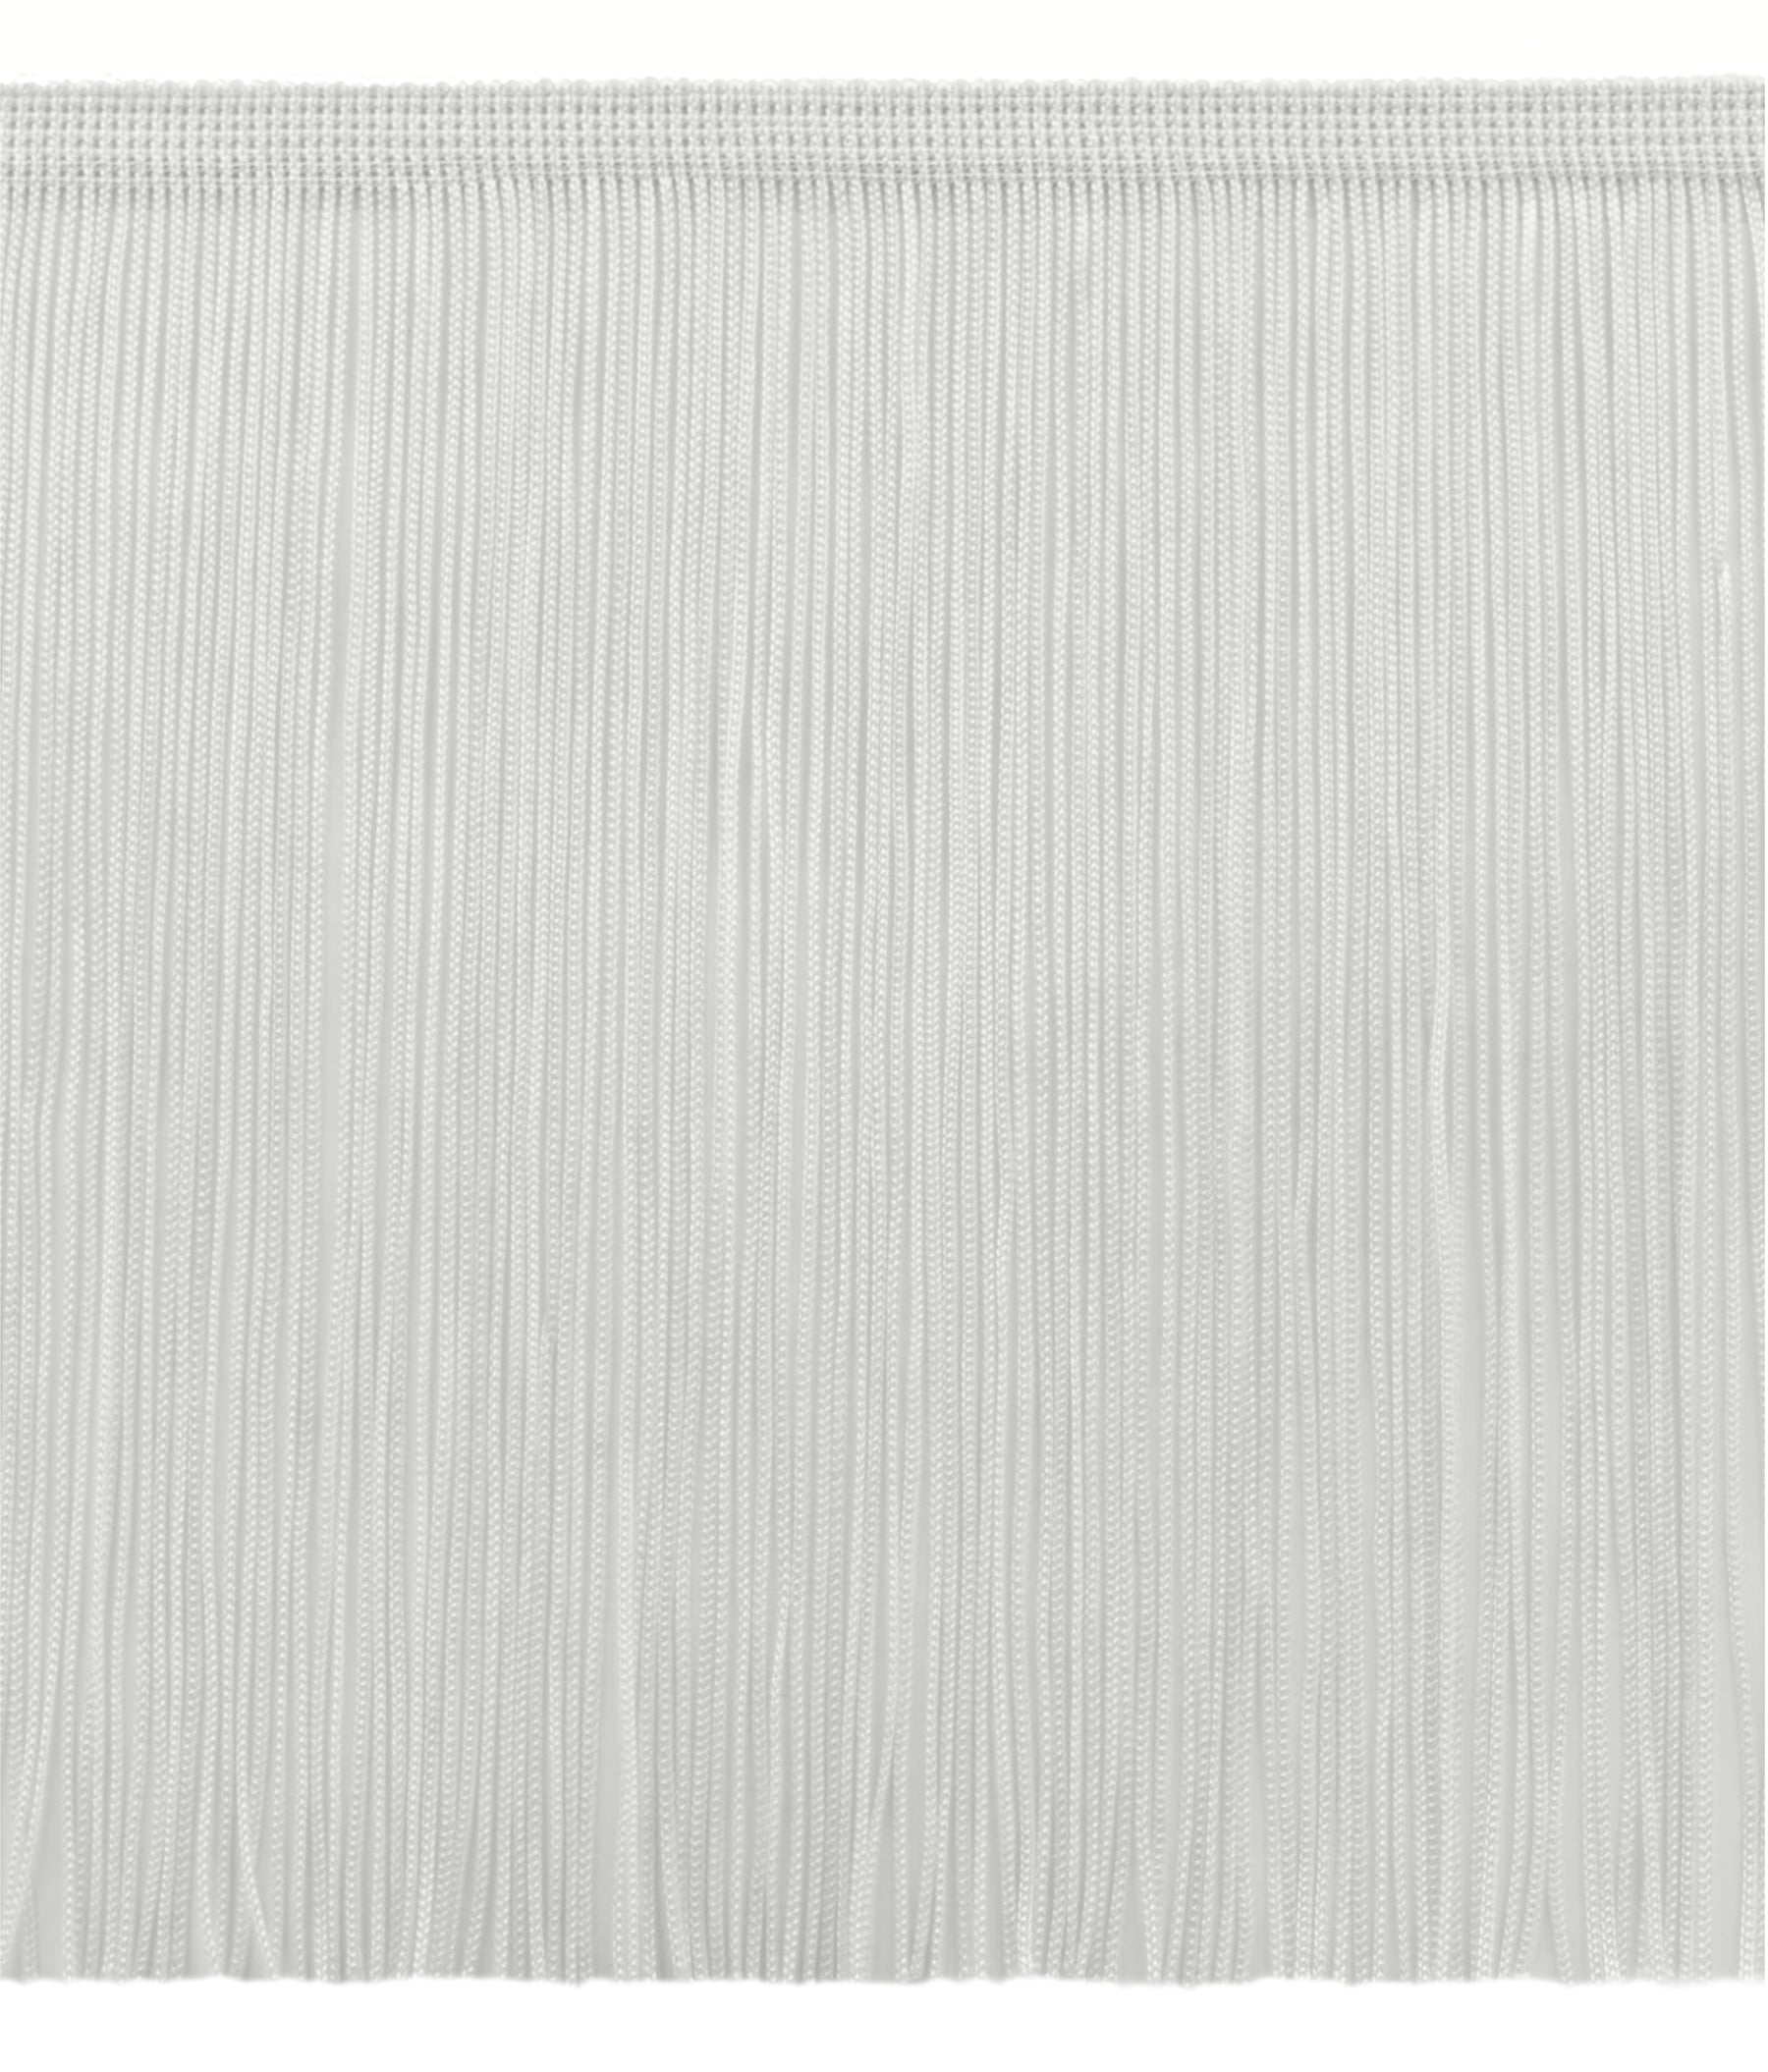 4 Inch Long Loop Fringe Trim A1 Style# CLF4 Color: WHITE Sold By the Yard